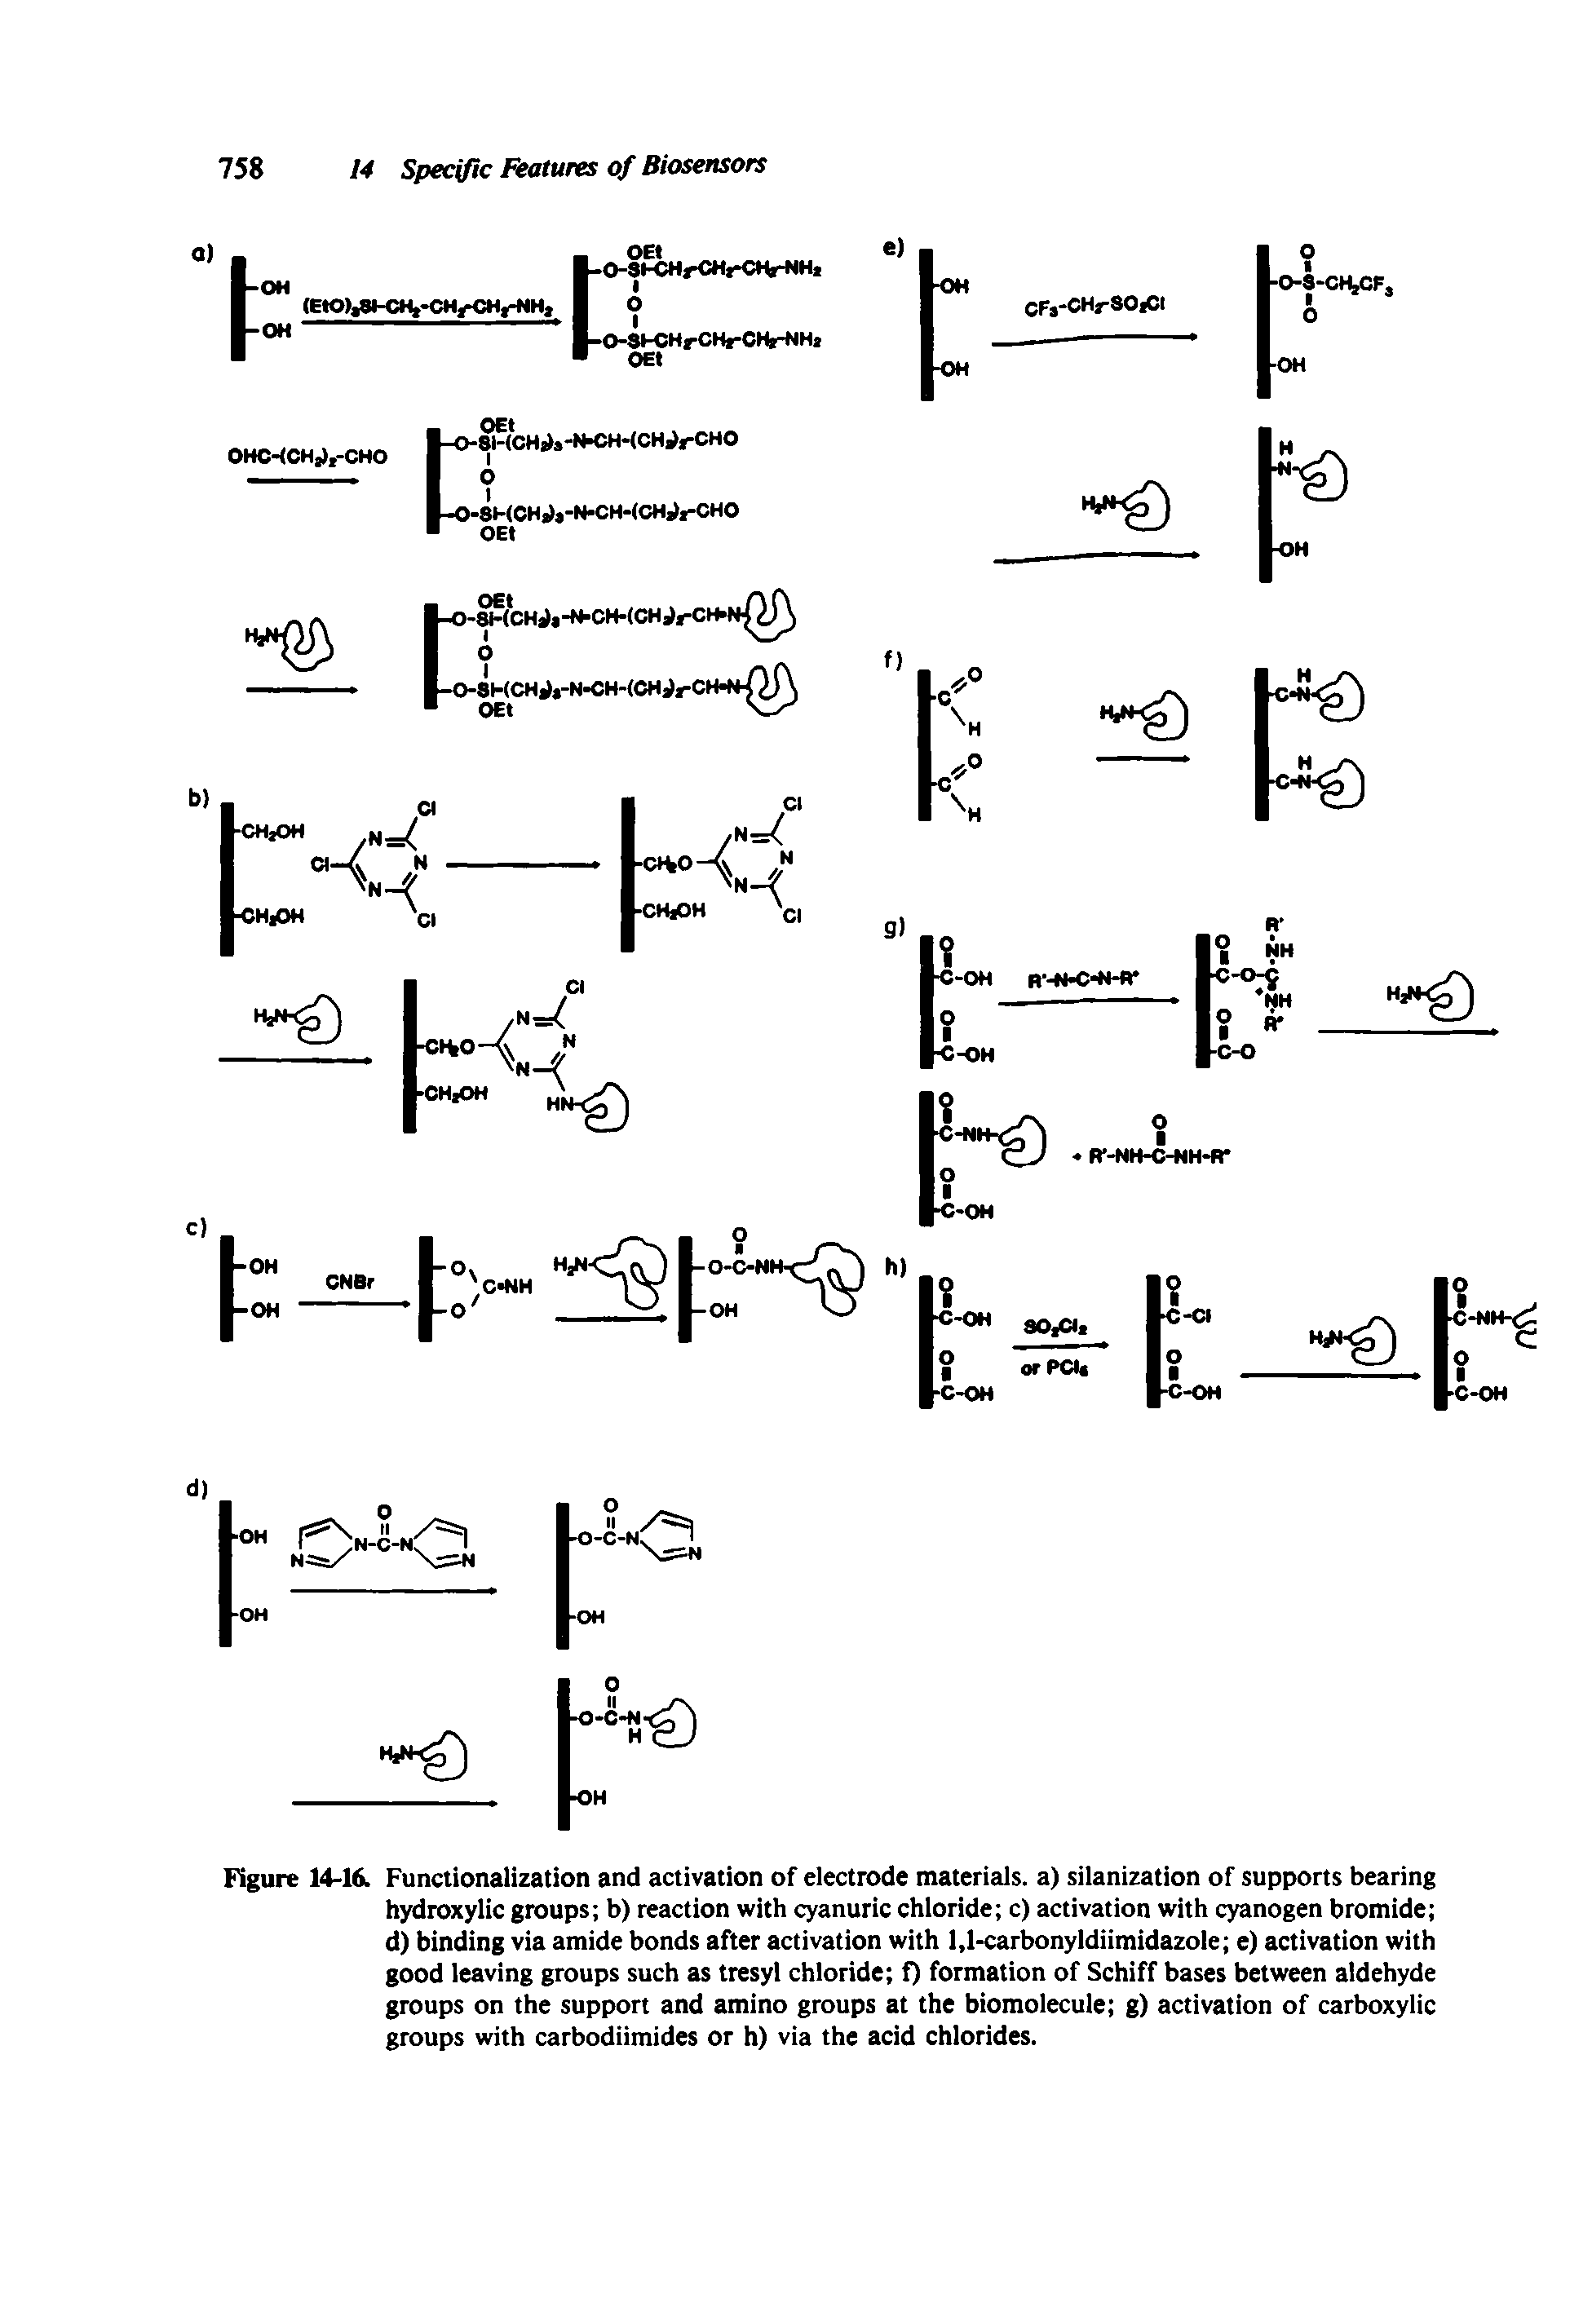 Figure 14-1 Functionalization and activation of electrode materials, a) silanization of supports bearing hydroxylic groups b) reaction with cyanuric chloride c) activation with cyanogen bromide d) binding via amide bonds after activation with 1,1-carbonyldiimidazole e) activation with good leaving groups such as tresyl chloride f) formation of Schiff bases between aldehyde groups on the support and amino groups at the biomolecule g) activation of carboxylic groups with carbodiimides or h) via the acid chlorides.